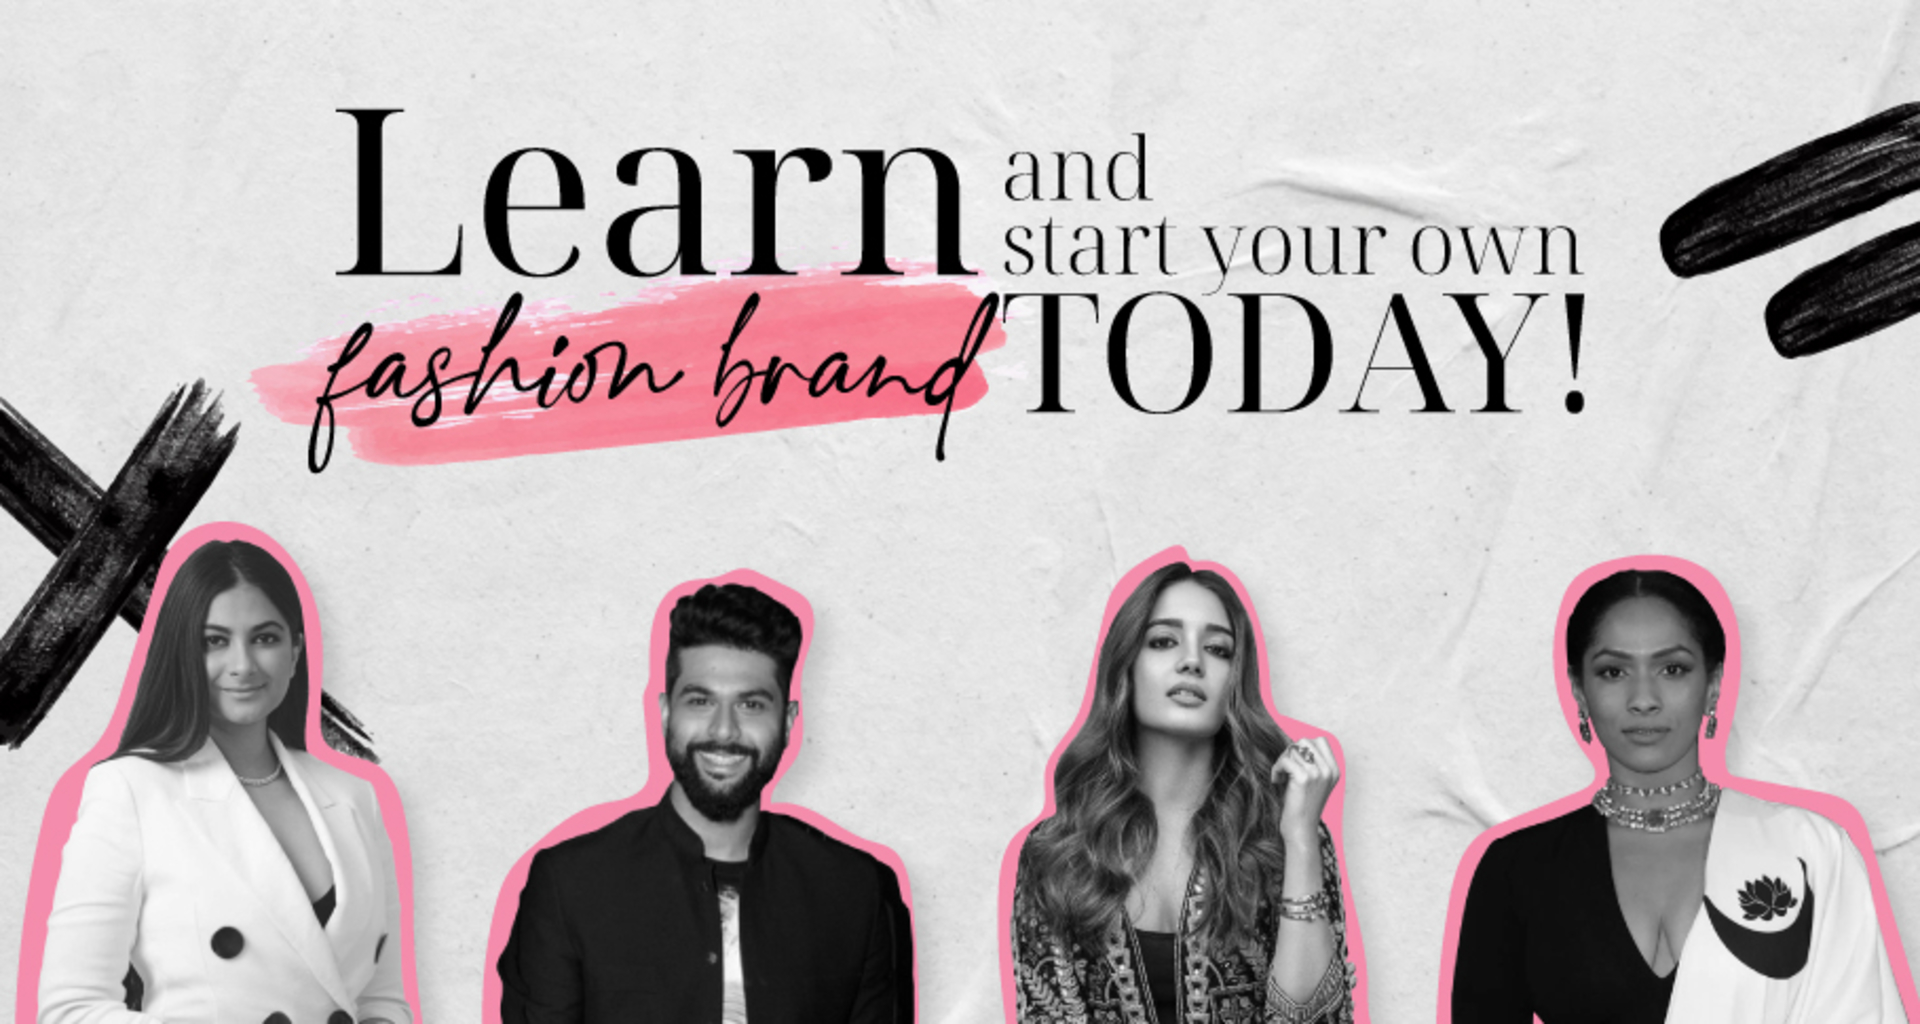 Learn and start your own fashion brand TODAY! - blog by Winkl (An influencer marketing platform)